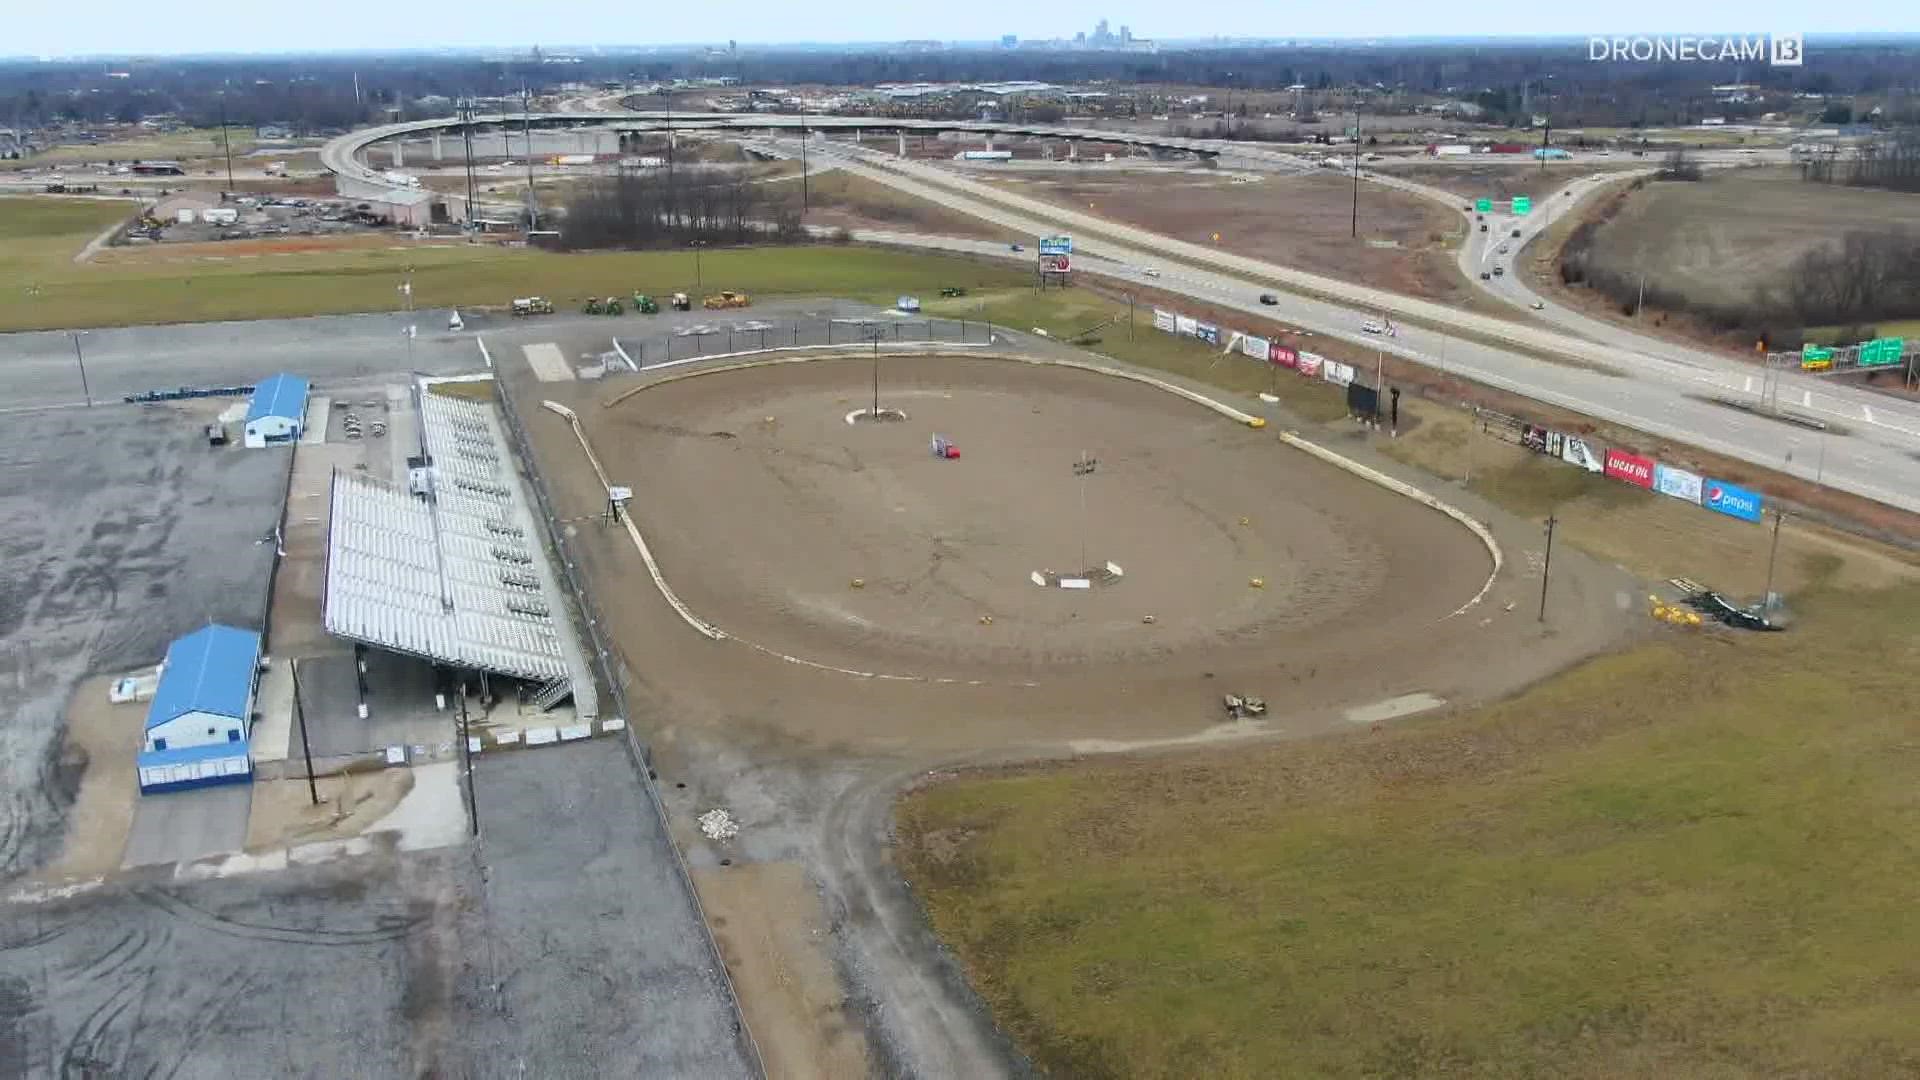 Racecars and loud cheers are the sounds of summer at the Marion County fairgrounds - but people living close by say it's a nuisance.